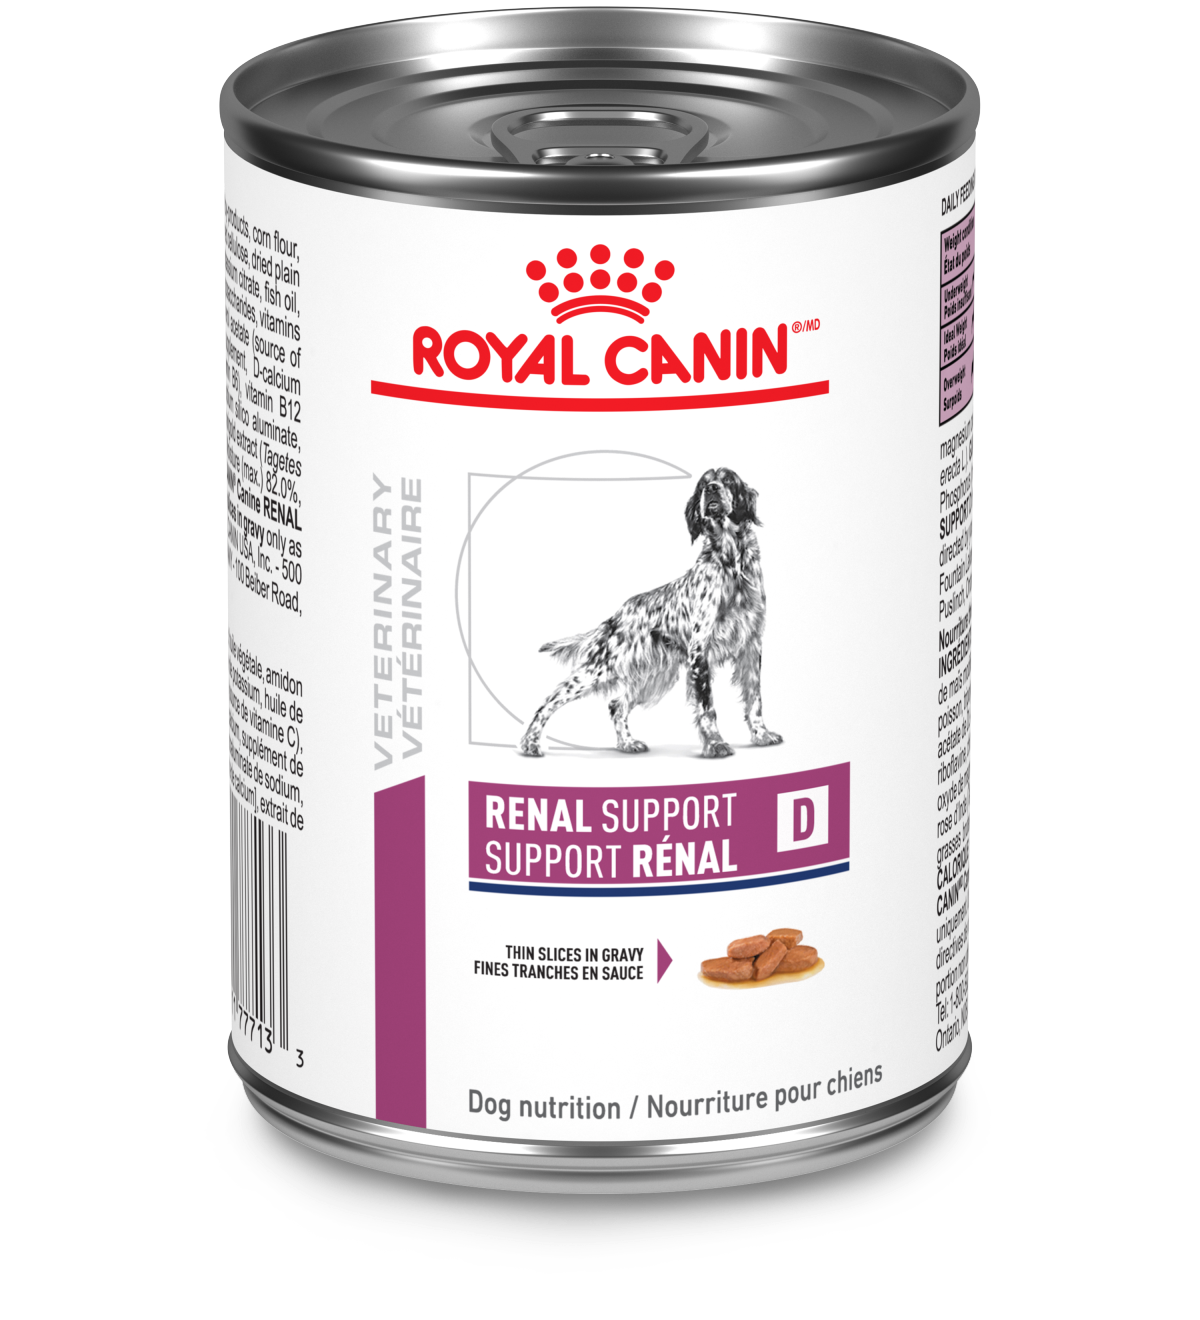 Canine Renal Support D thin slices in gravy